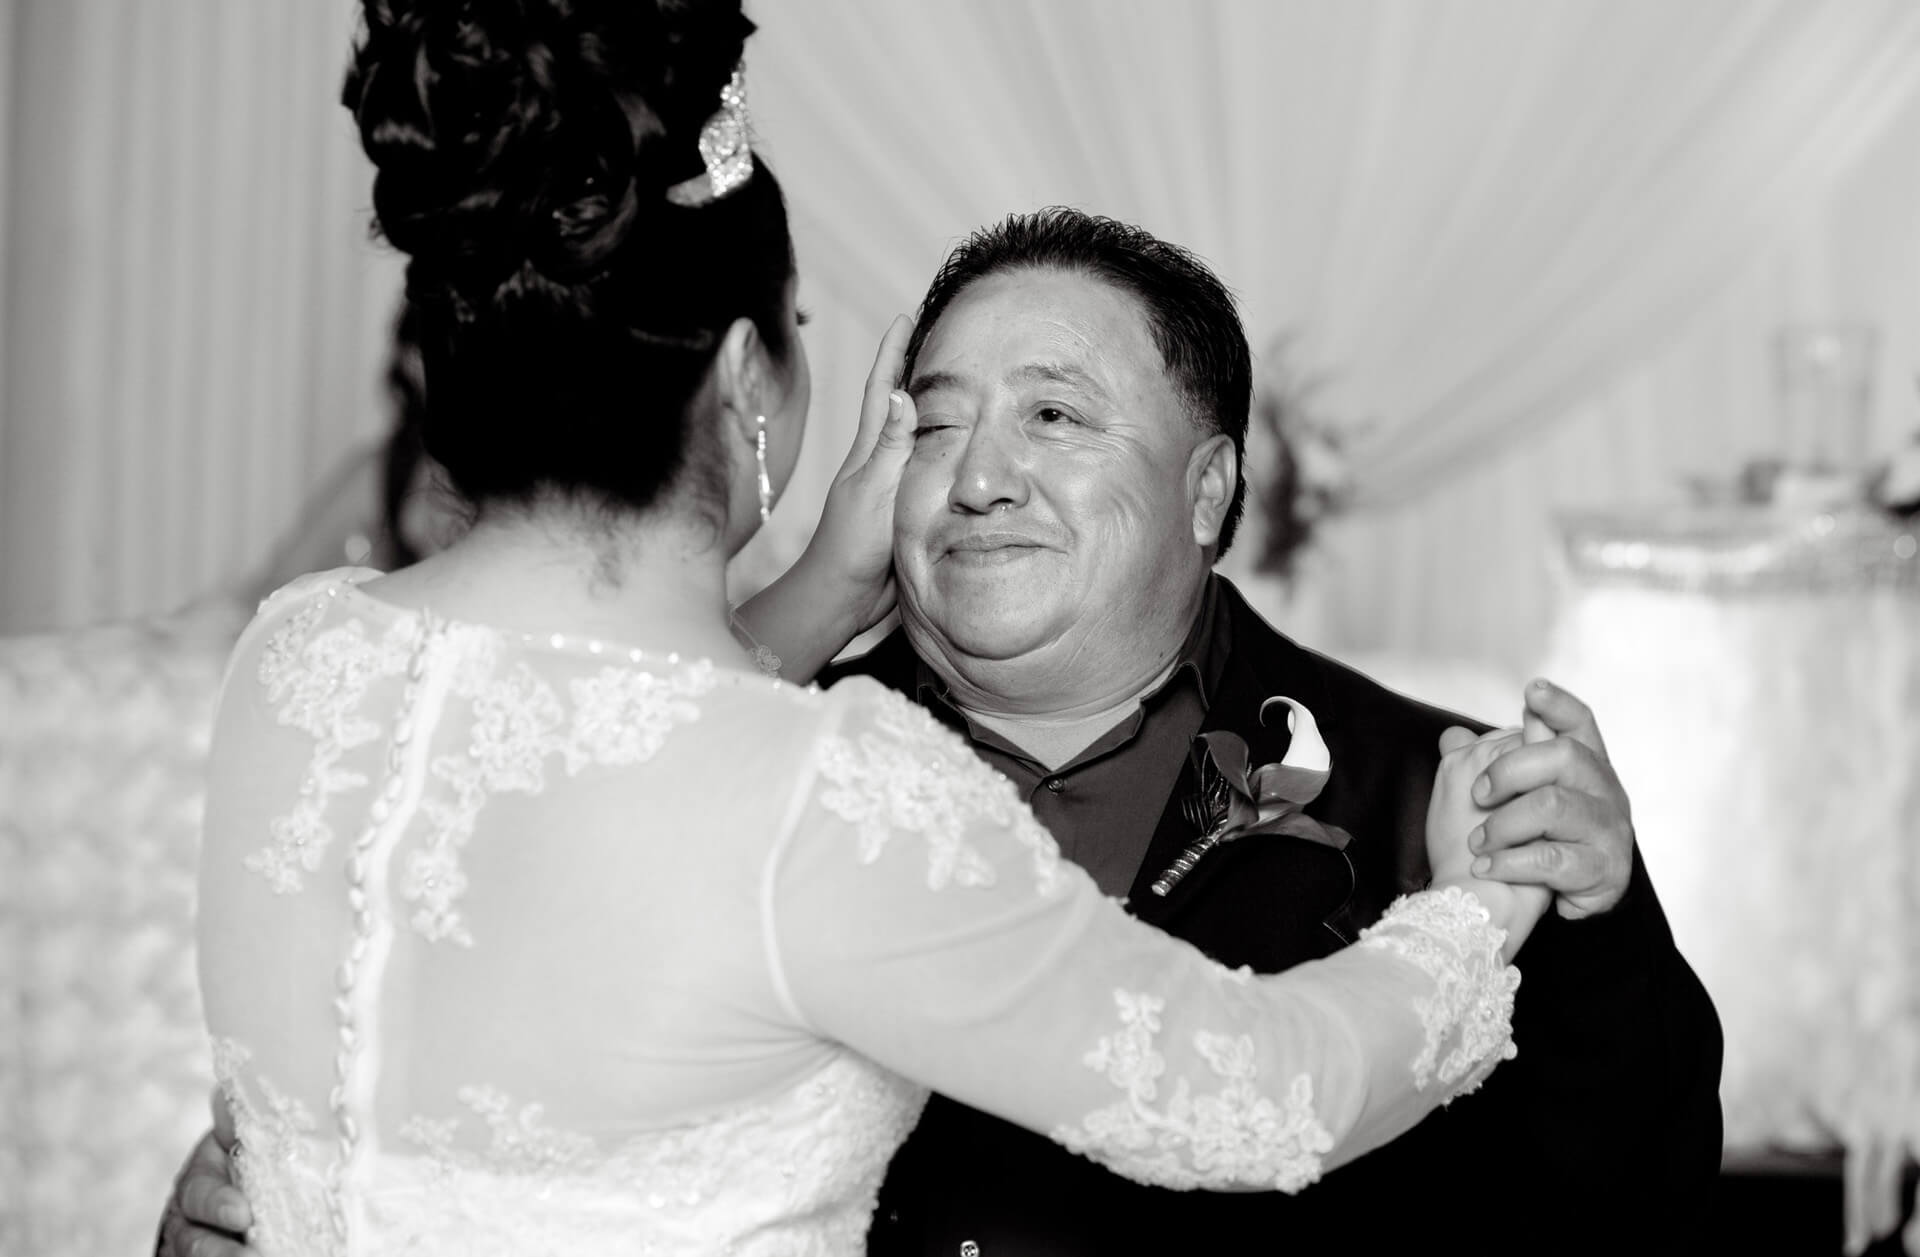 Michigan wedding photographer takes photojournalists photos of a bride wiping a tear from her father's cheek during their father daughter dance in this Mexican wedding in Detroit, Michigan.